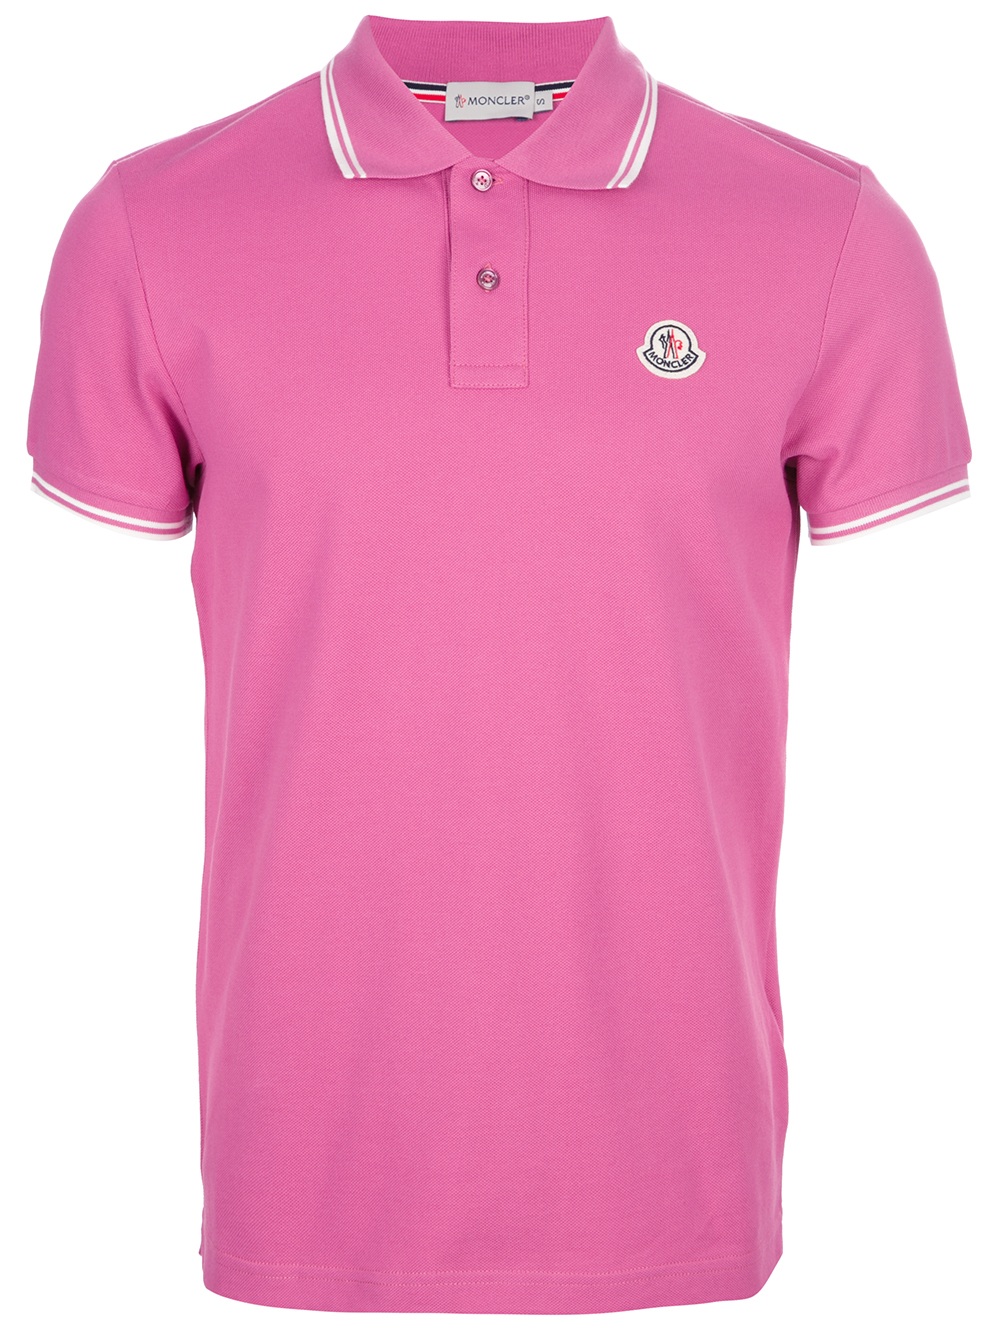 Lyst - Moncler Classic Polo Shirt in Pink for Men